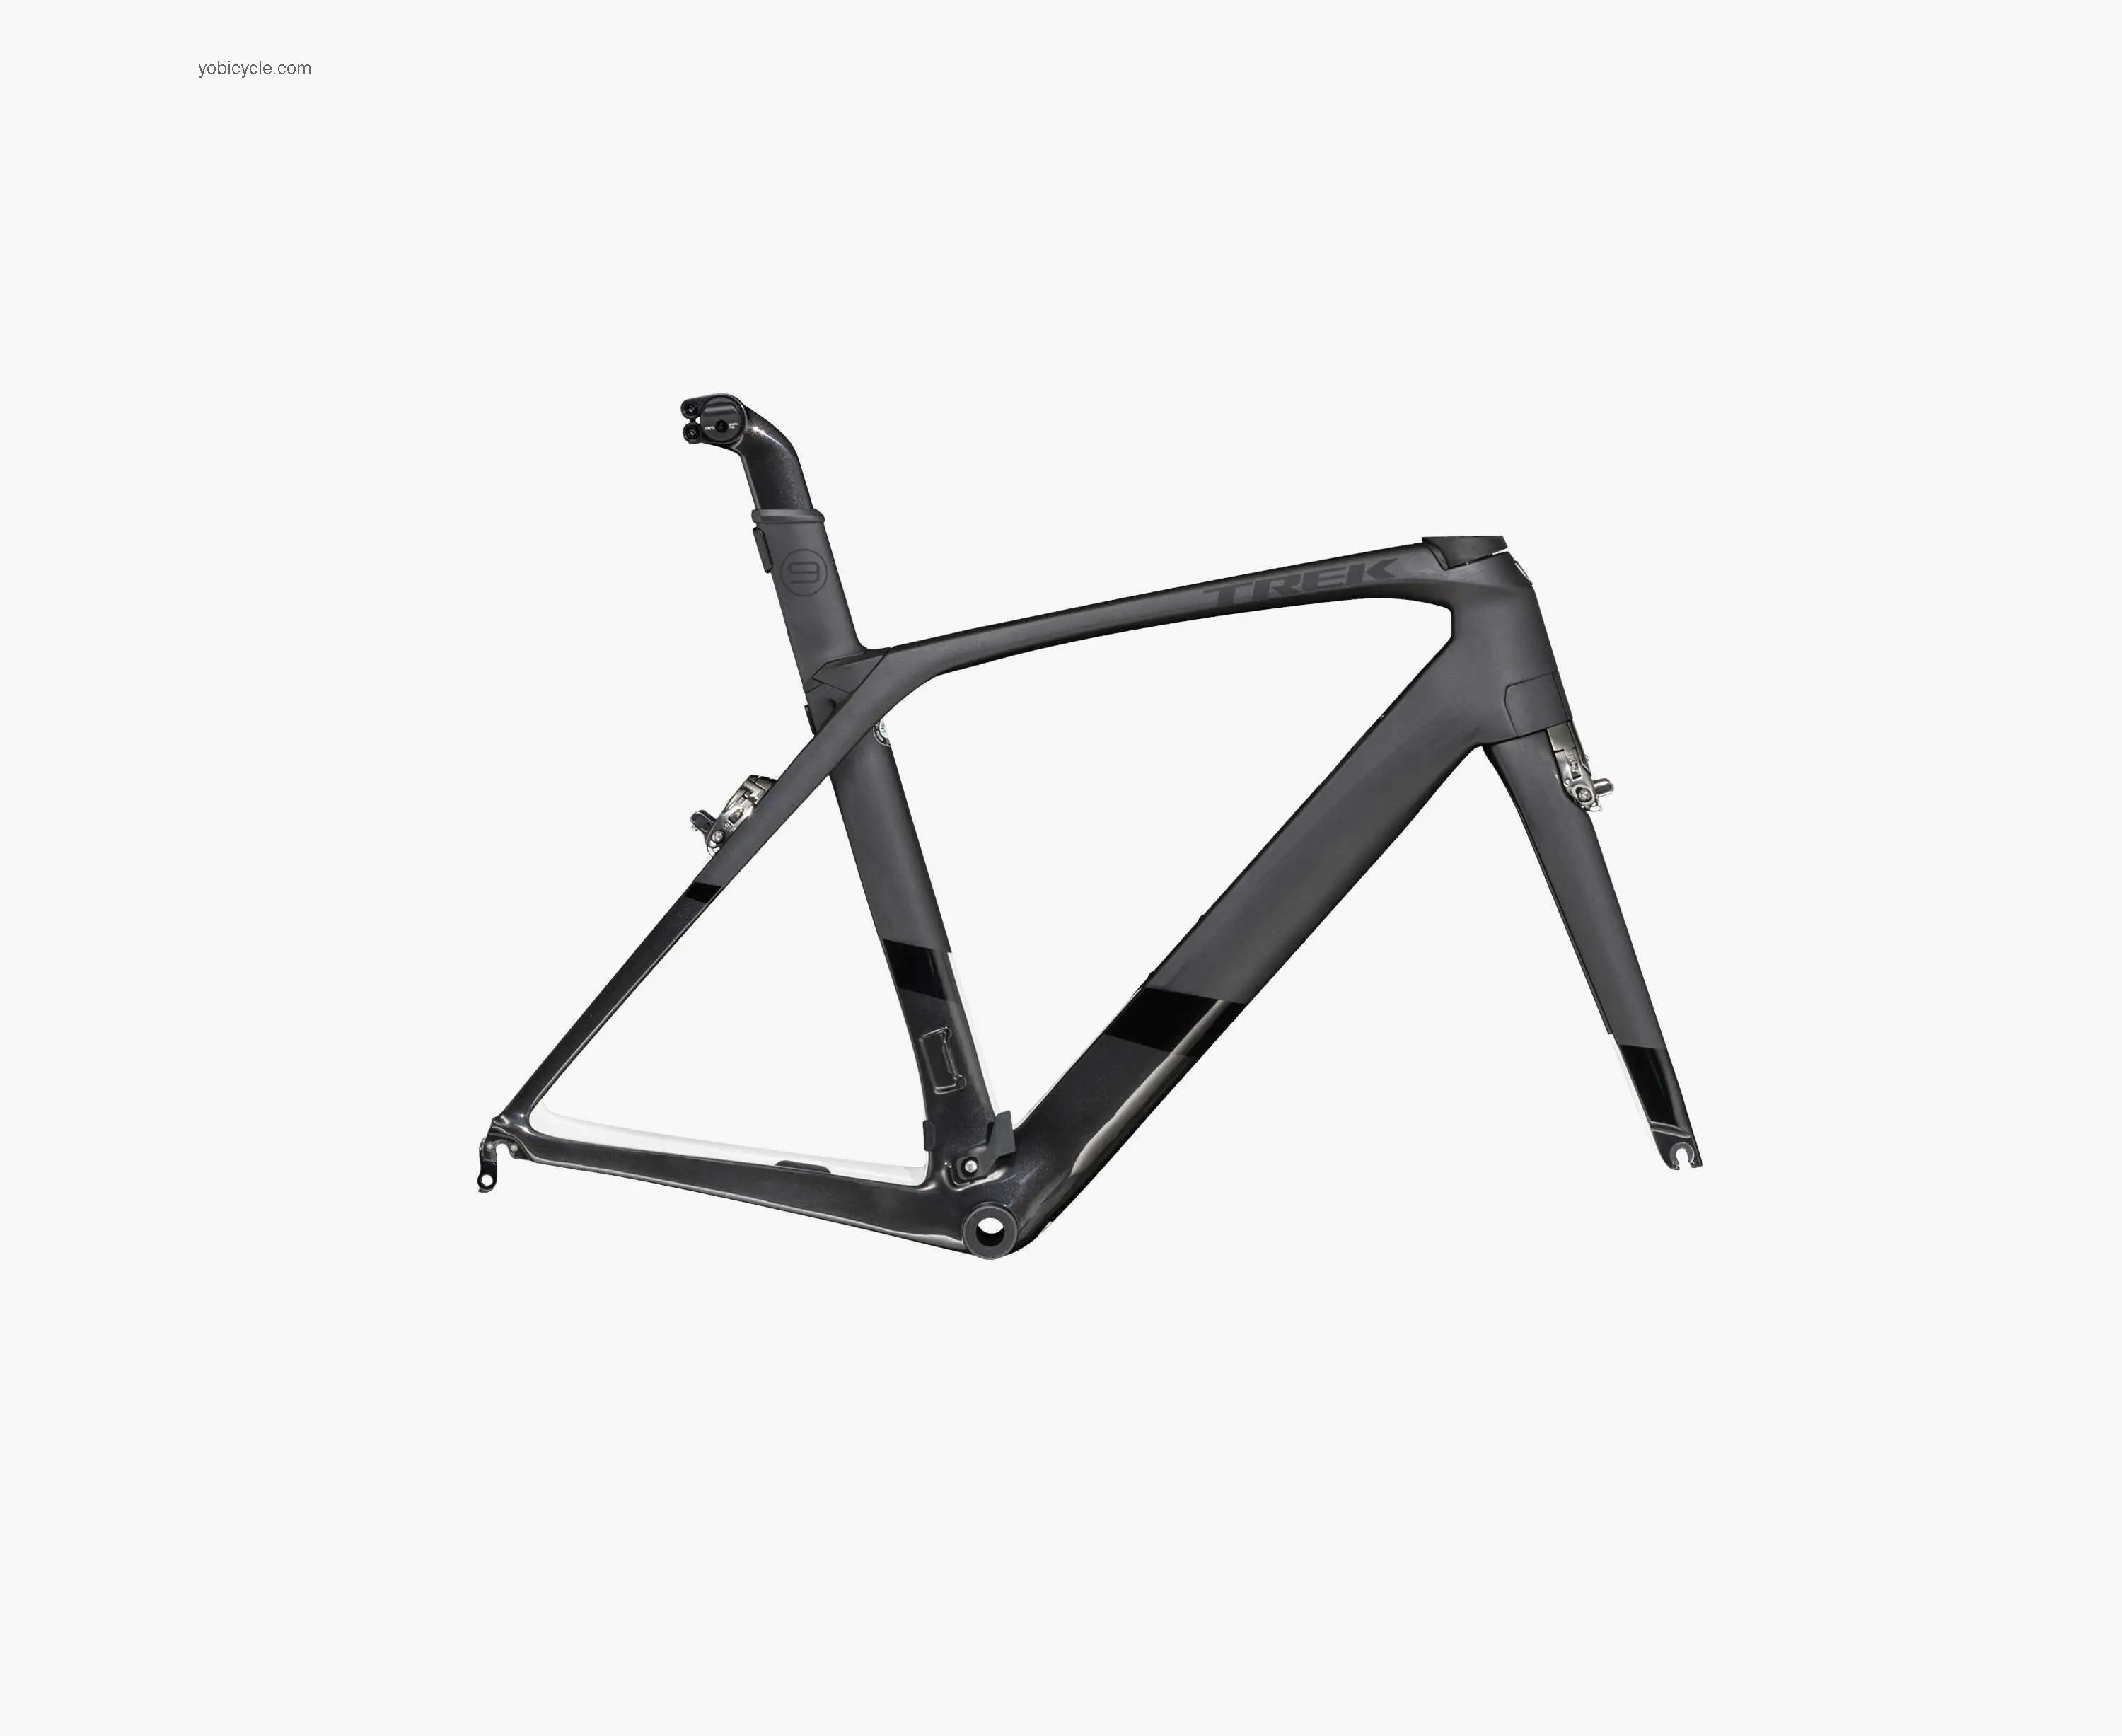 Trek  Madone 9 Series Frameset H2 fit Technical data and specifications